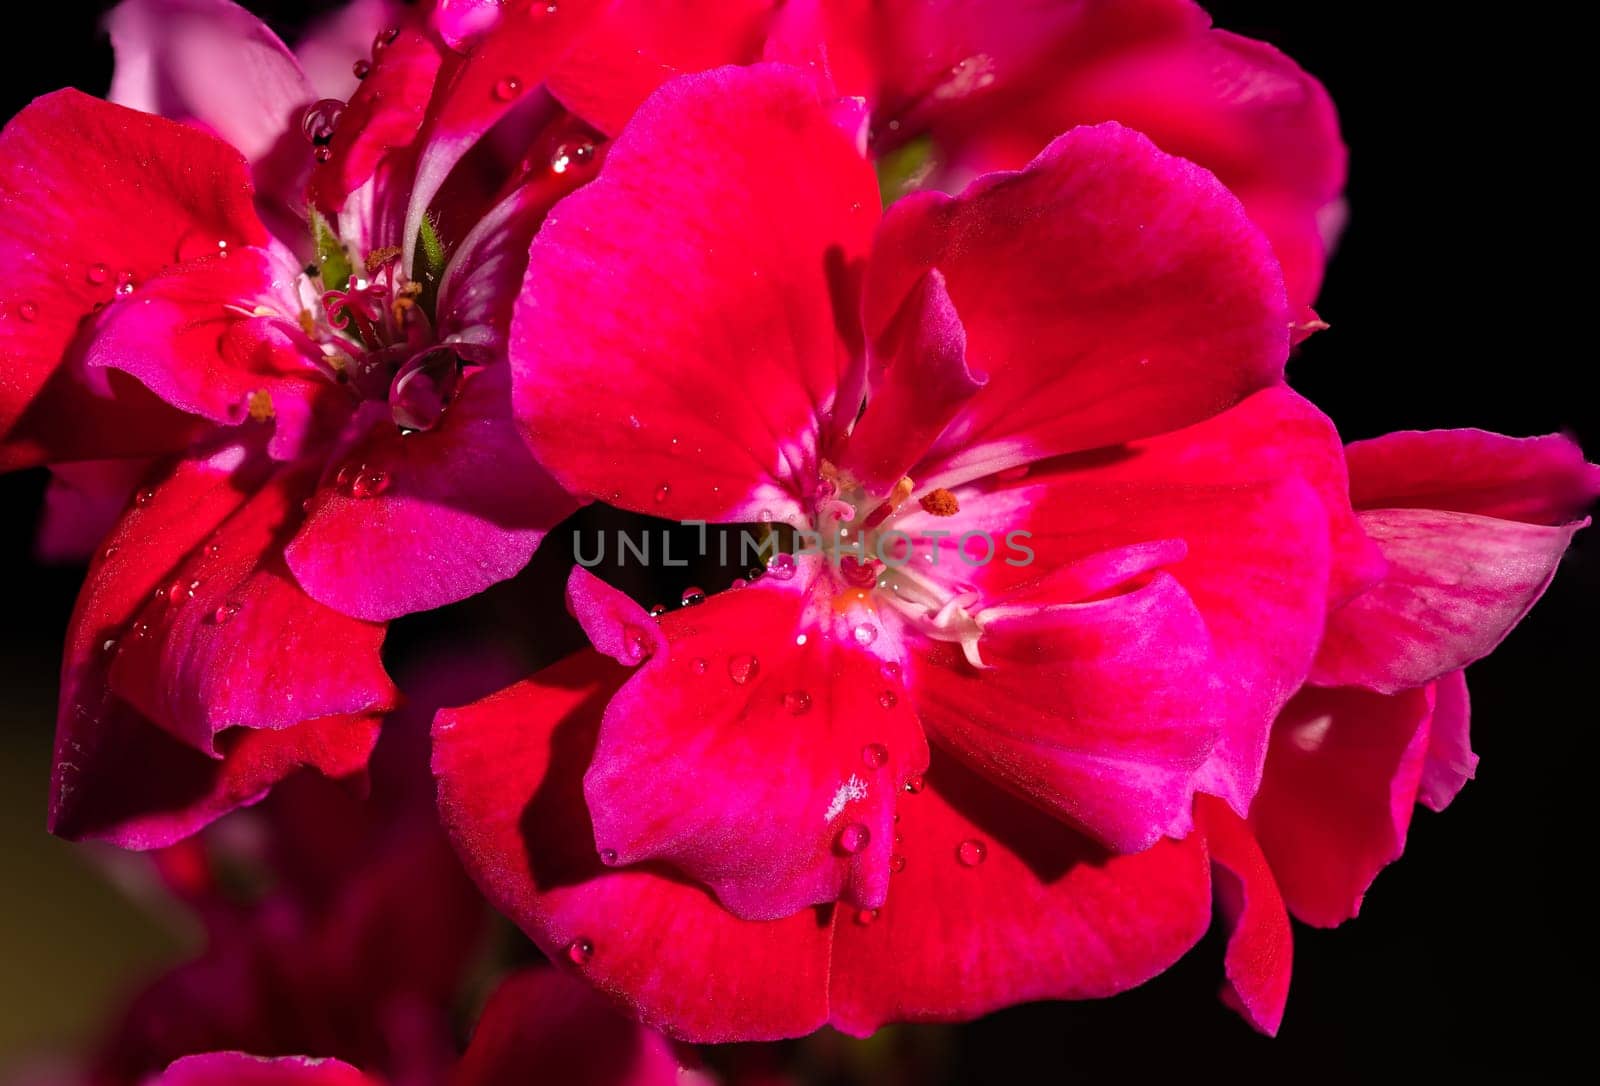 Red kalanchoe flowers on a black background by Multipedia